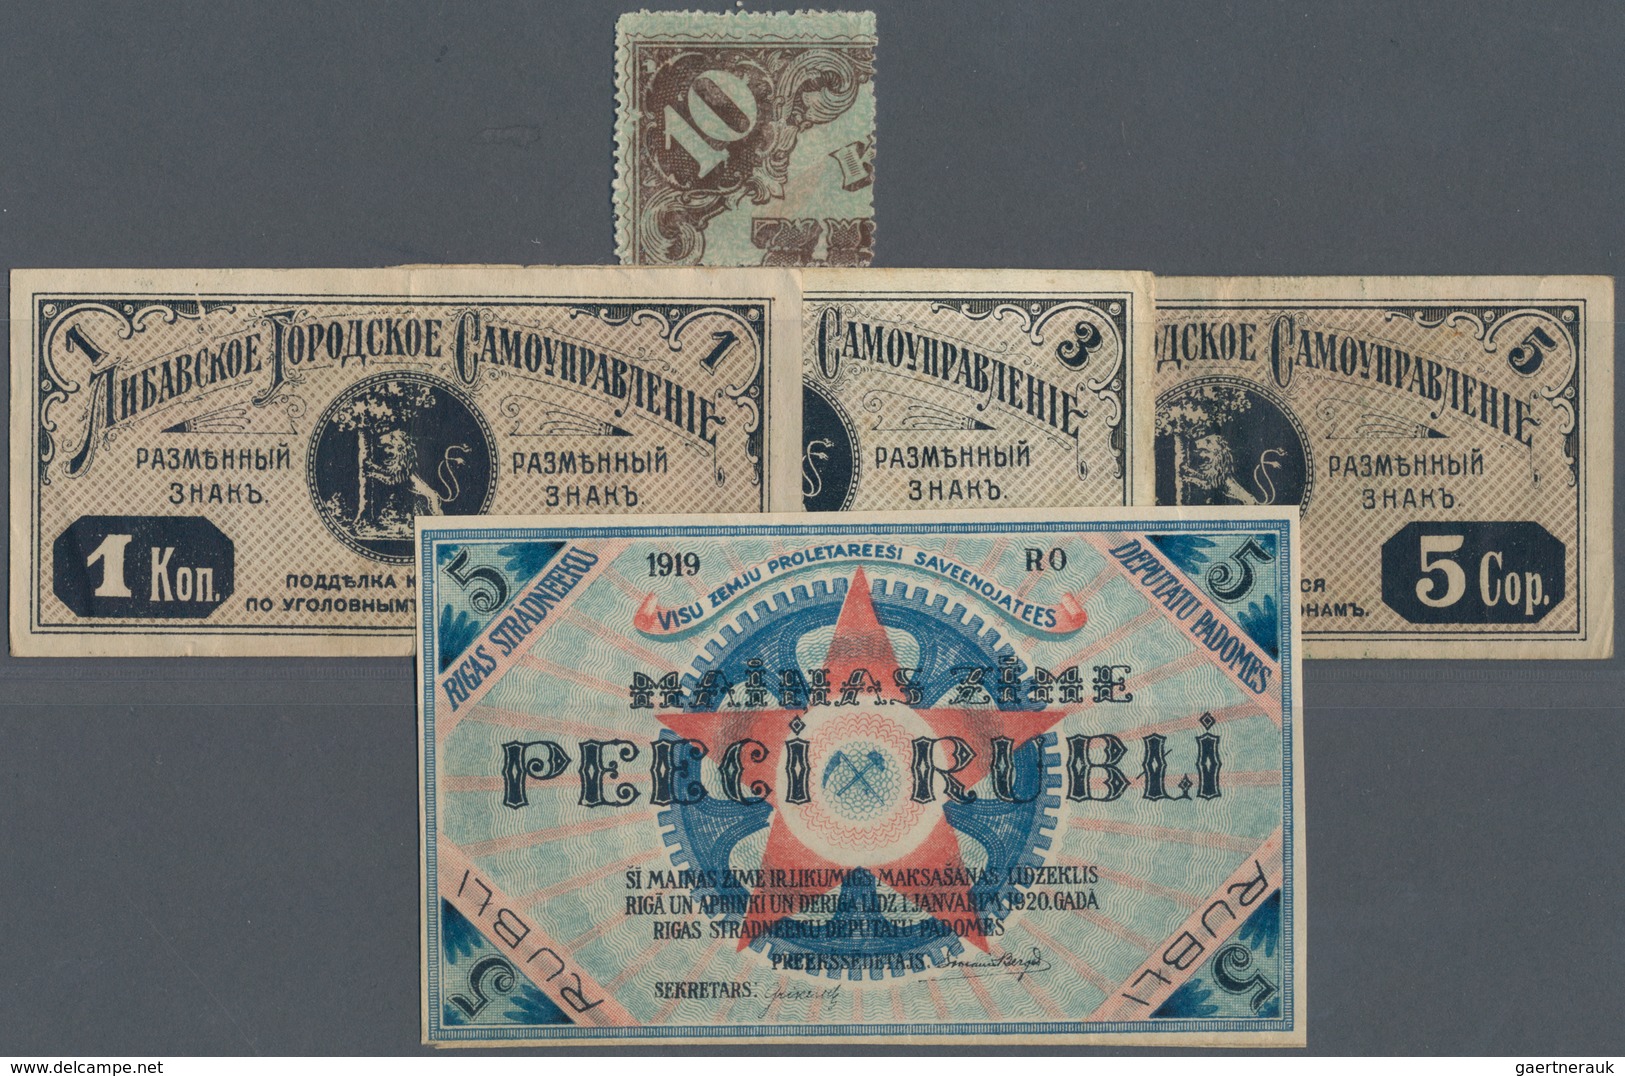 Latvia / Lettland: Libau City Government Set With 3 Banknotes 1, 3 And 5 Kopeks 1915 In F, City Of R - Letland